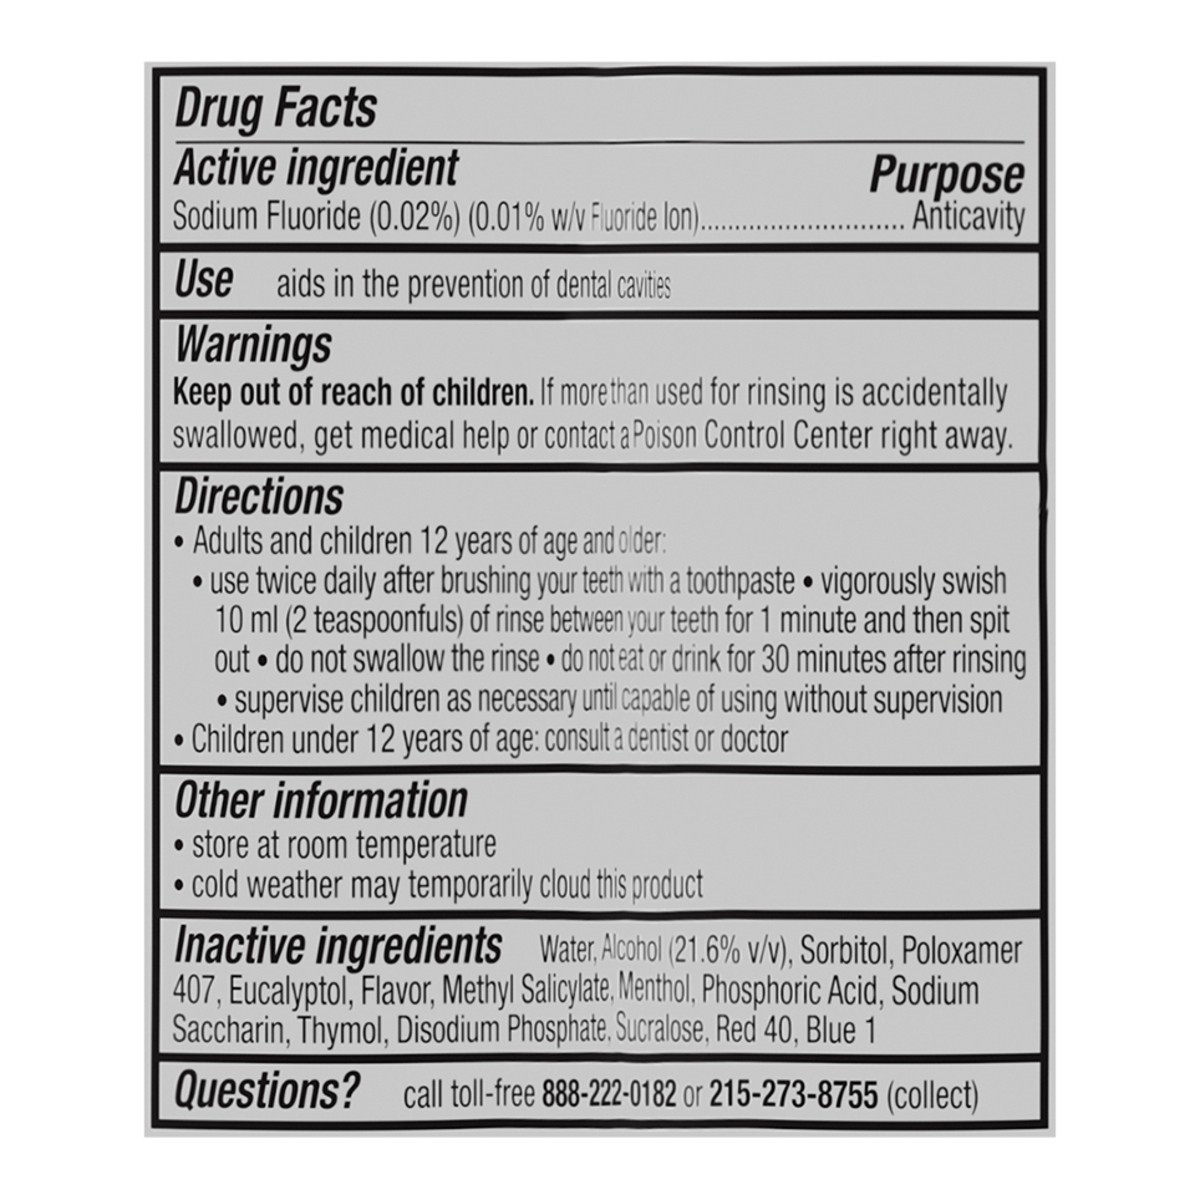 slide 11 of 11, Listerine Total Care Anticavity Fluoride Mouthwash, 6 Benefit Oral Rinse Kills 99% of Bad Breath Germs, Prevents Cavities, Strengthens Enamel, ADA-Accepted, Fresh Mint, Travel Size, 95 mL, 95 ml